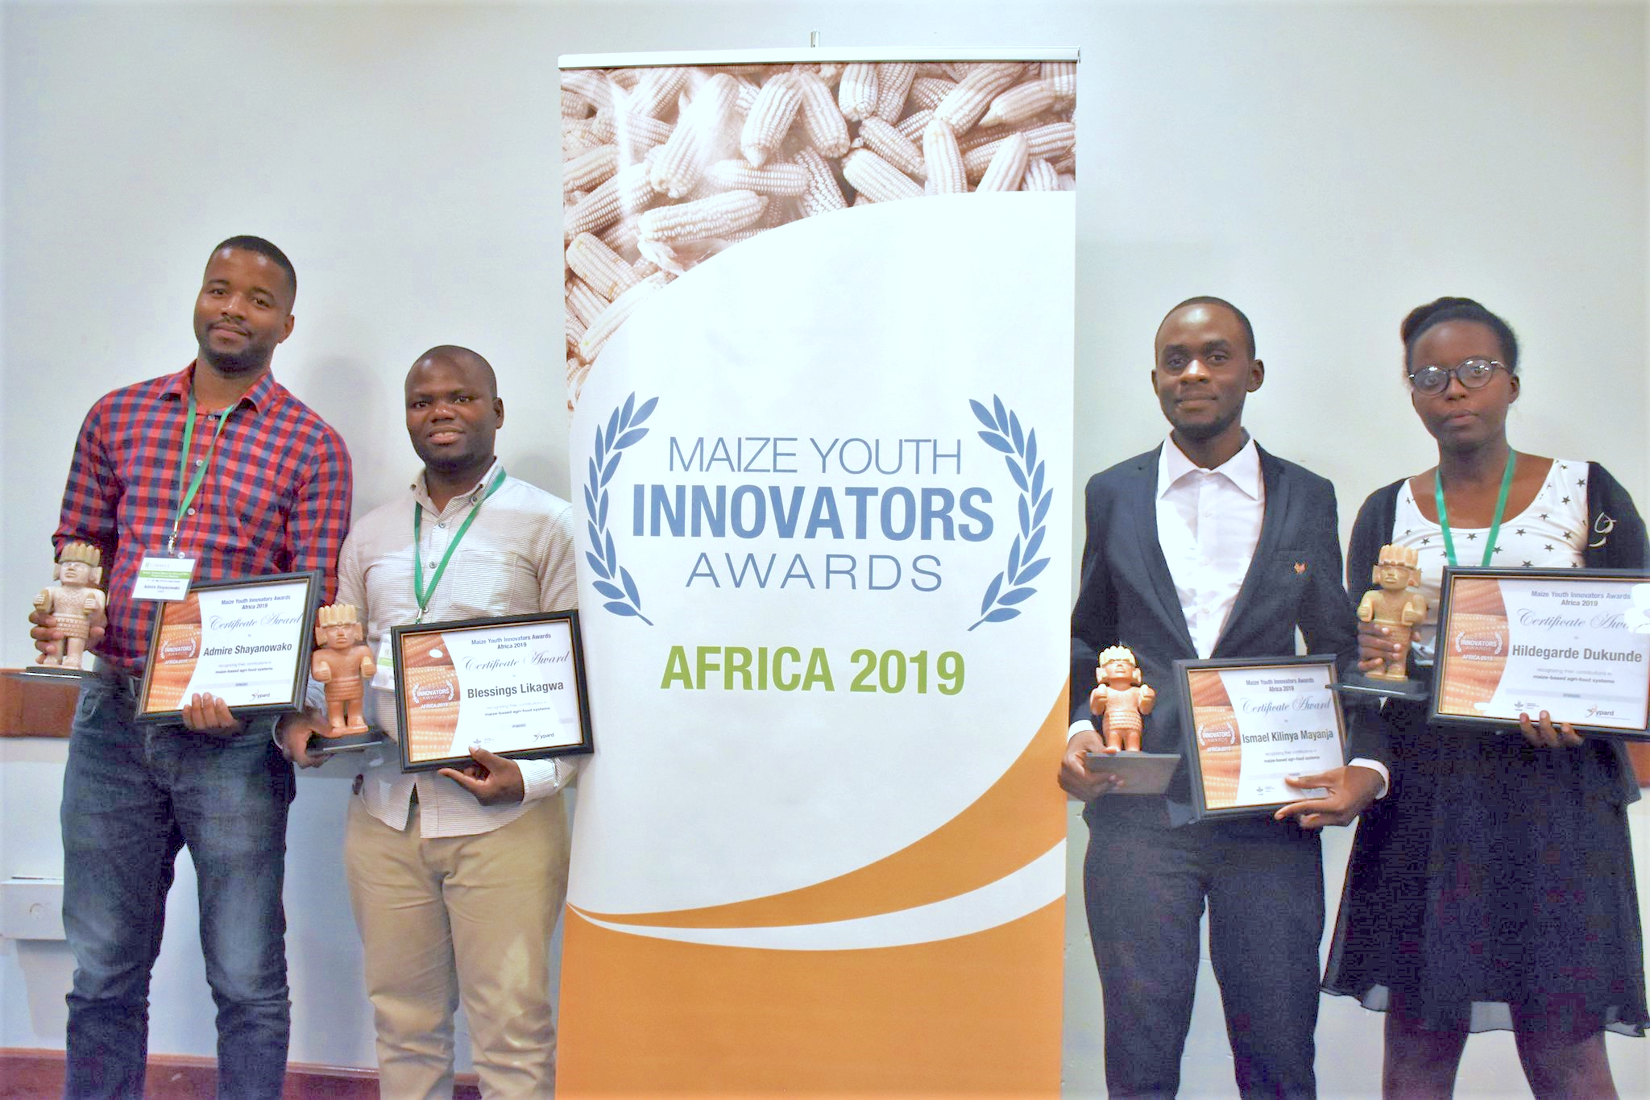 Winners of the 2019 MAIZE Youth Innovators Awards – Africa receive their awards at the STMA meeting in Lusaka, Zambia. From left to right: Admire Shayanowako, Blessings Likagwa, Ismael Mayanja and Hildegarde Dukunde. Fifth awardee Mila Lokwa Giresse not pictured. (Photo: J.Bossuet/CIMMYT)